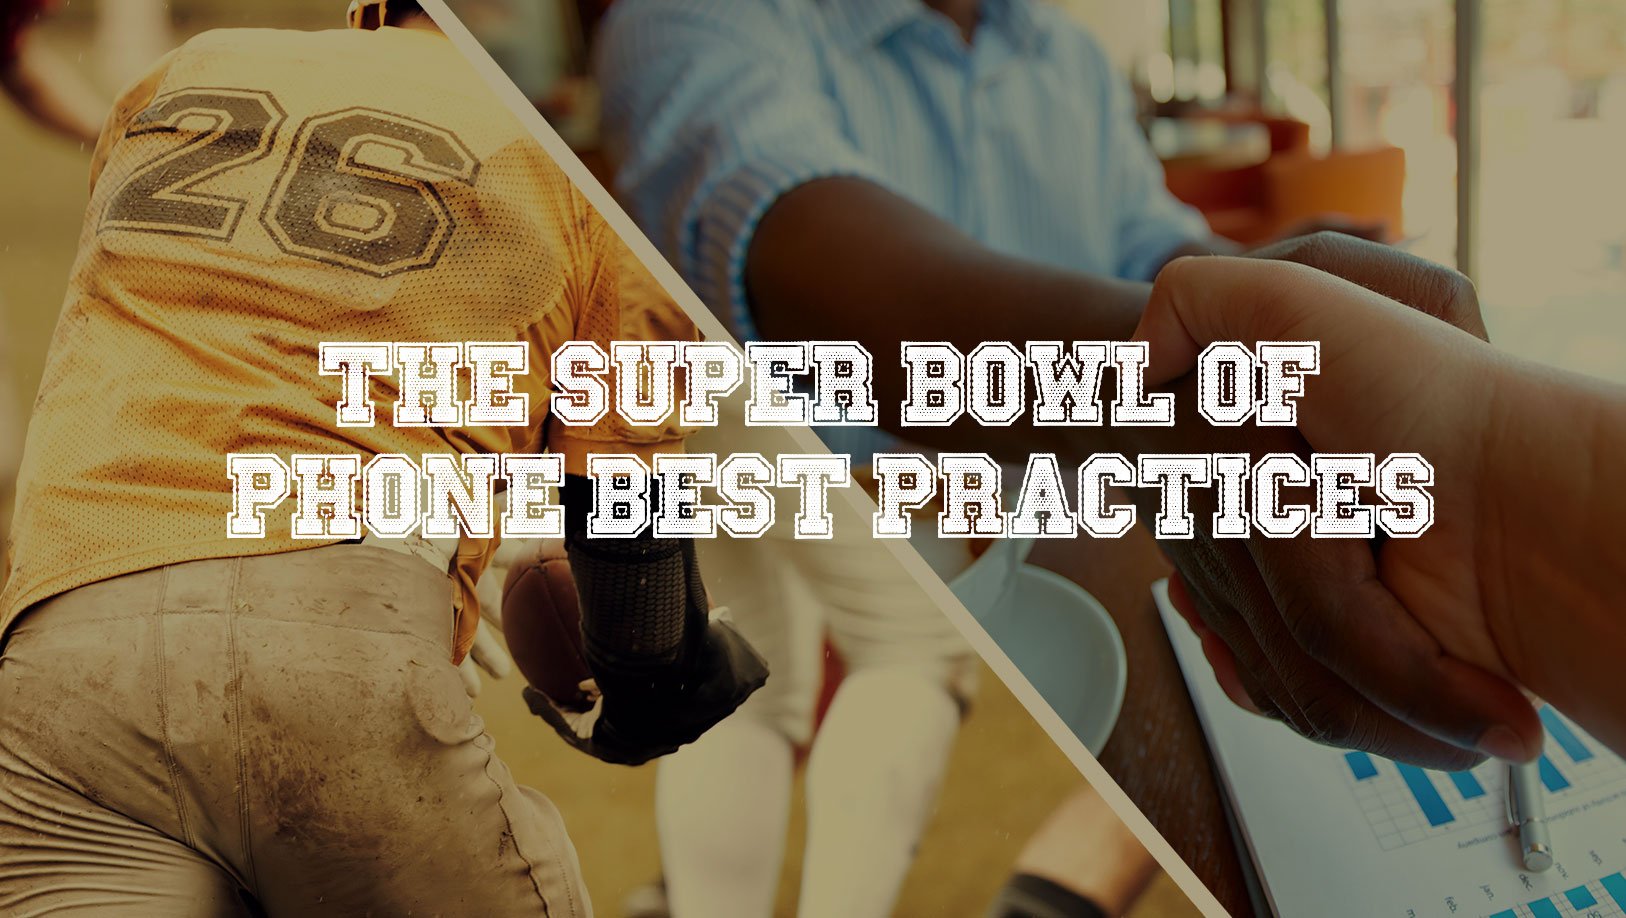 The Super Bowl of Phone Best Practices